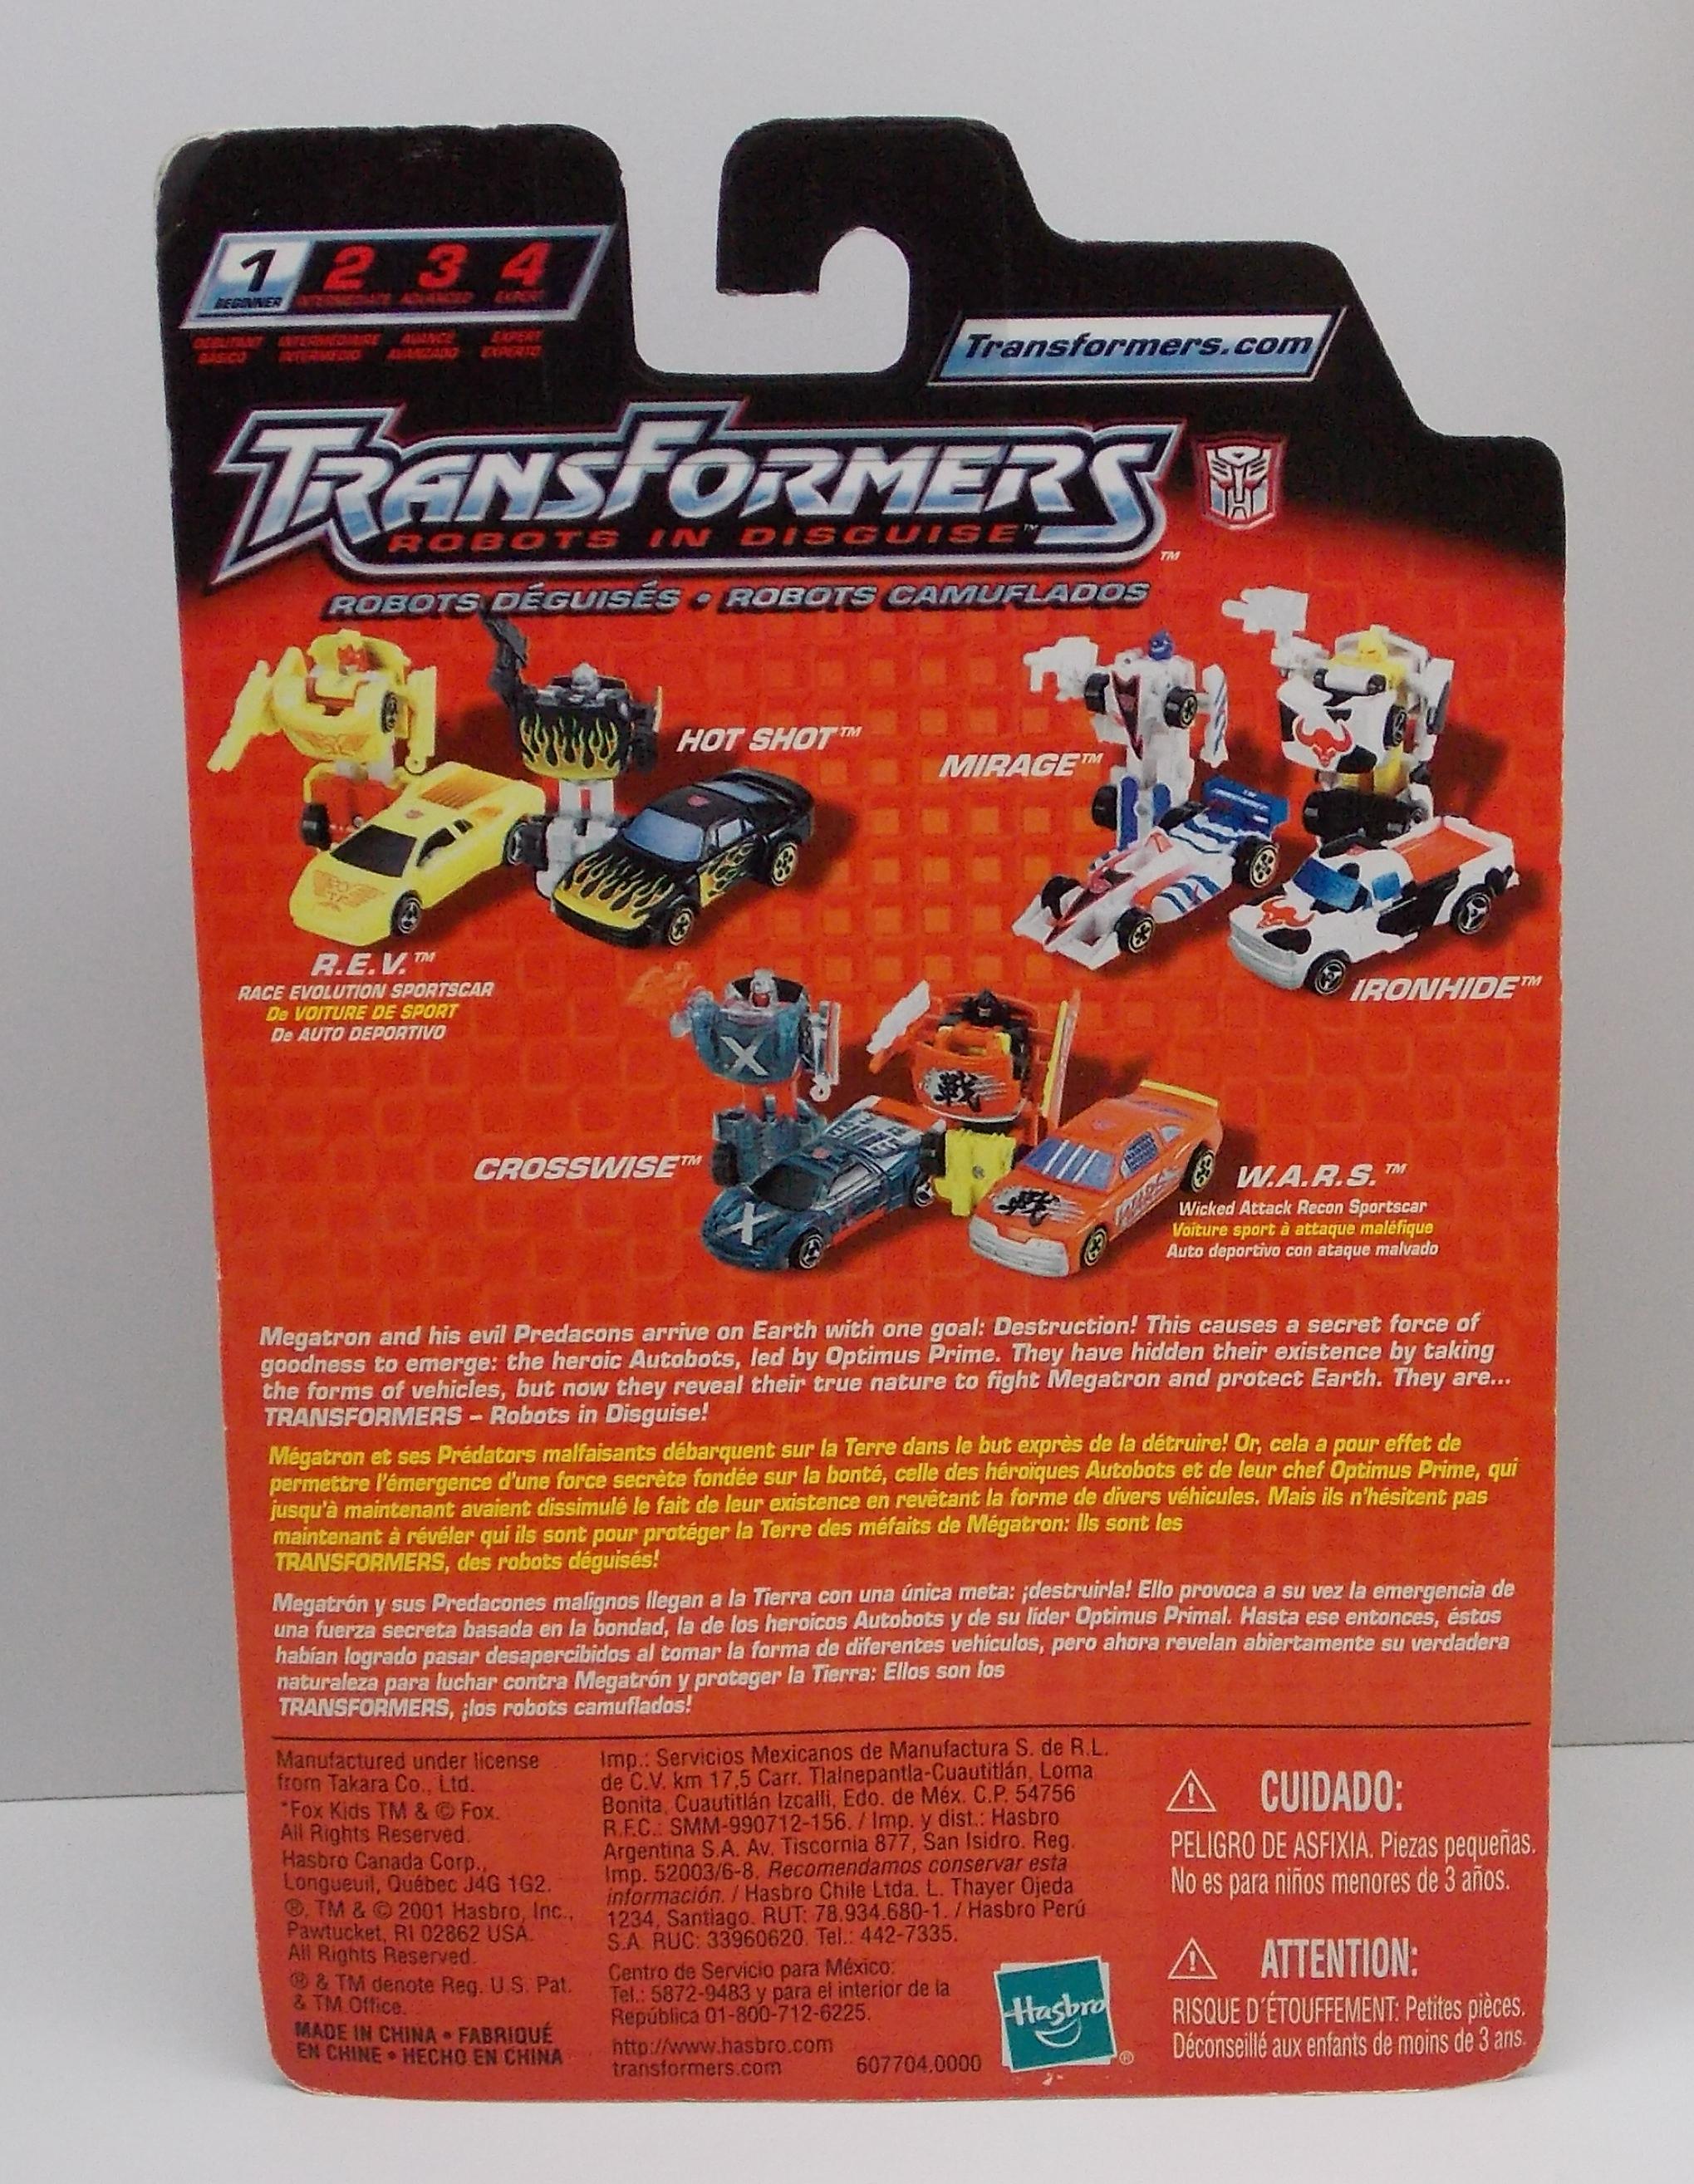 Hot Shot  R.E.V. Transformers Robots In Disguise Minibot 2 pack